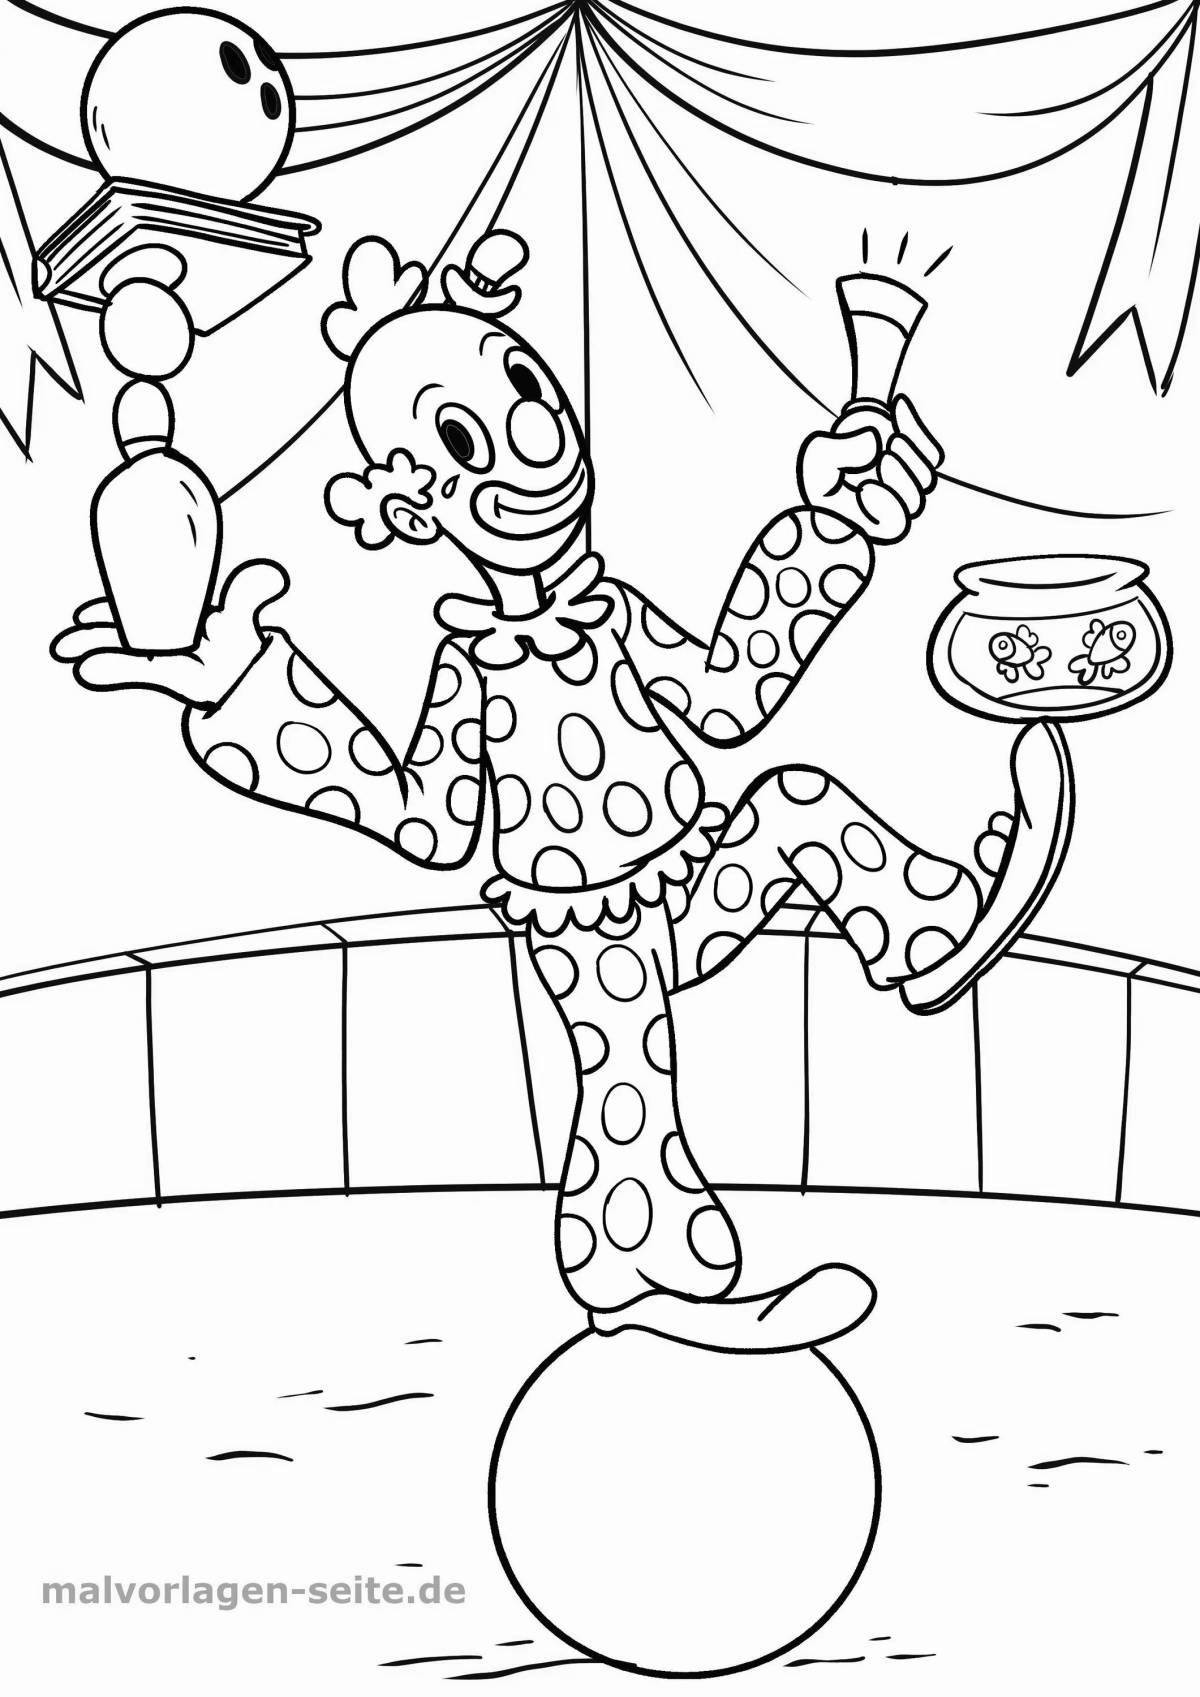 Coloring page magnificent circus arena